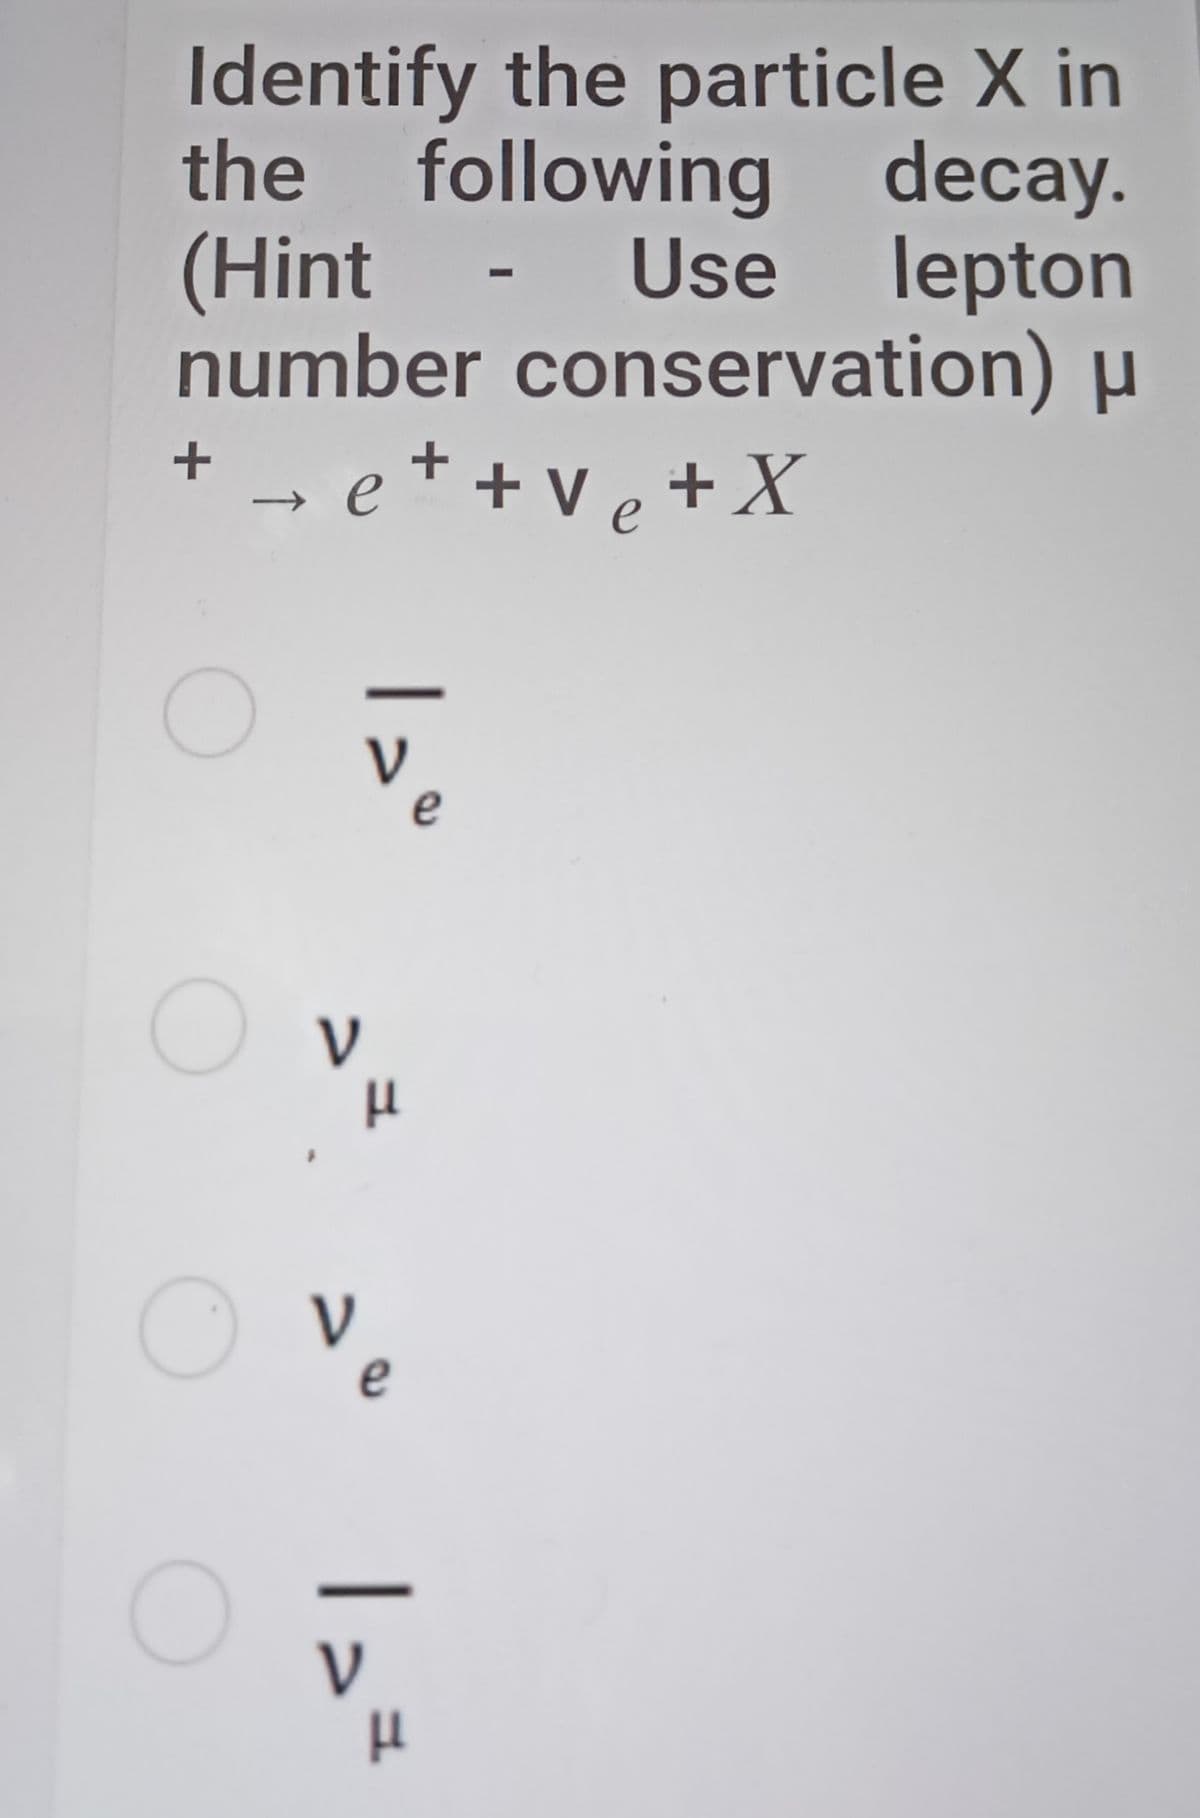 Identify the particle X in
the following
Use
decay.
(Hint
Use lepton
number conservation) µ
→ e* +v e + X
e
V
V
e
V
